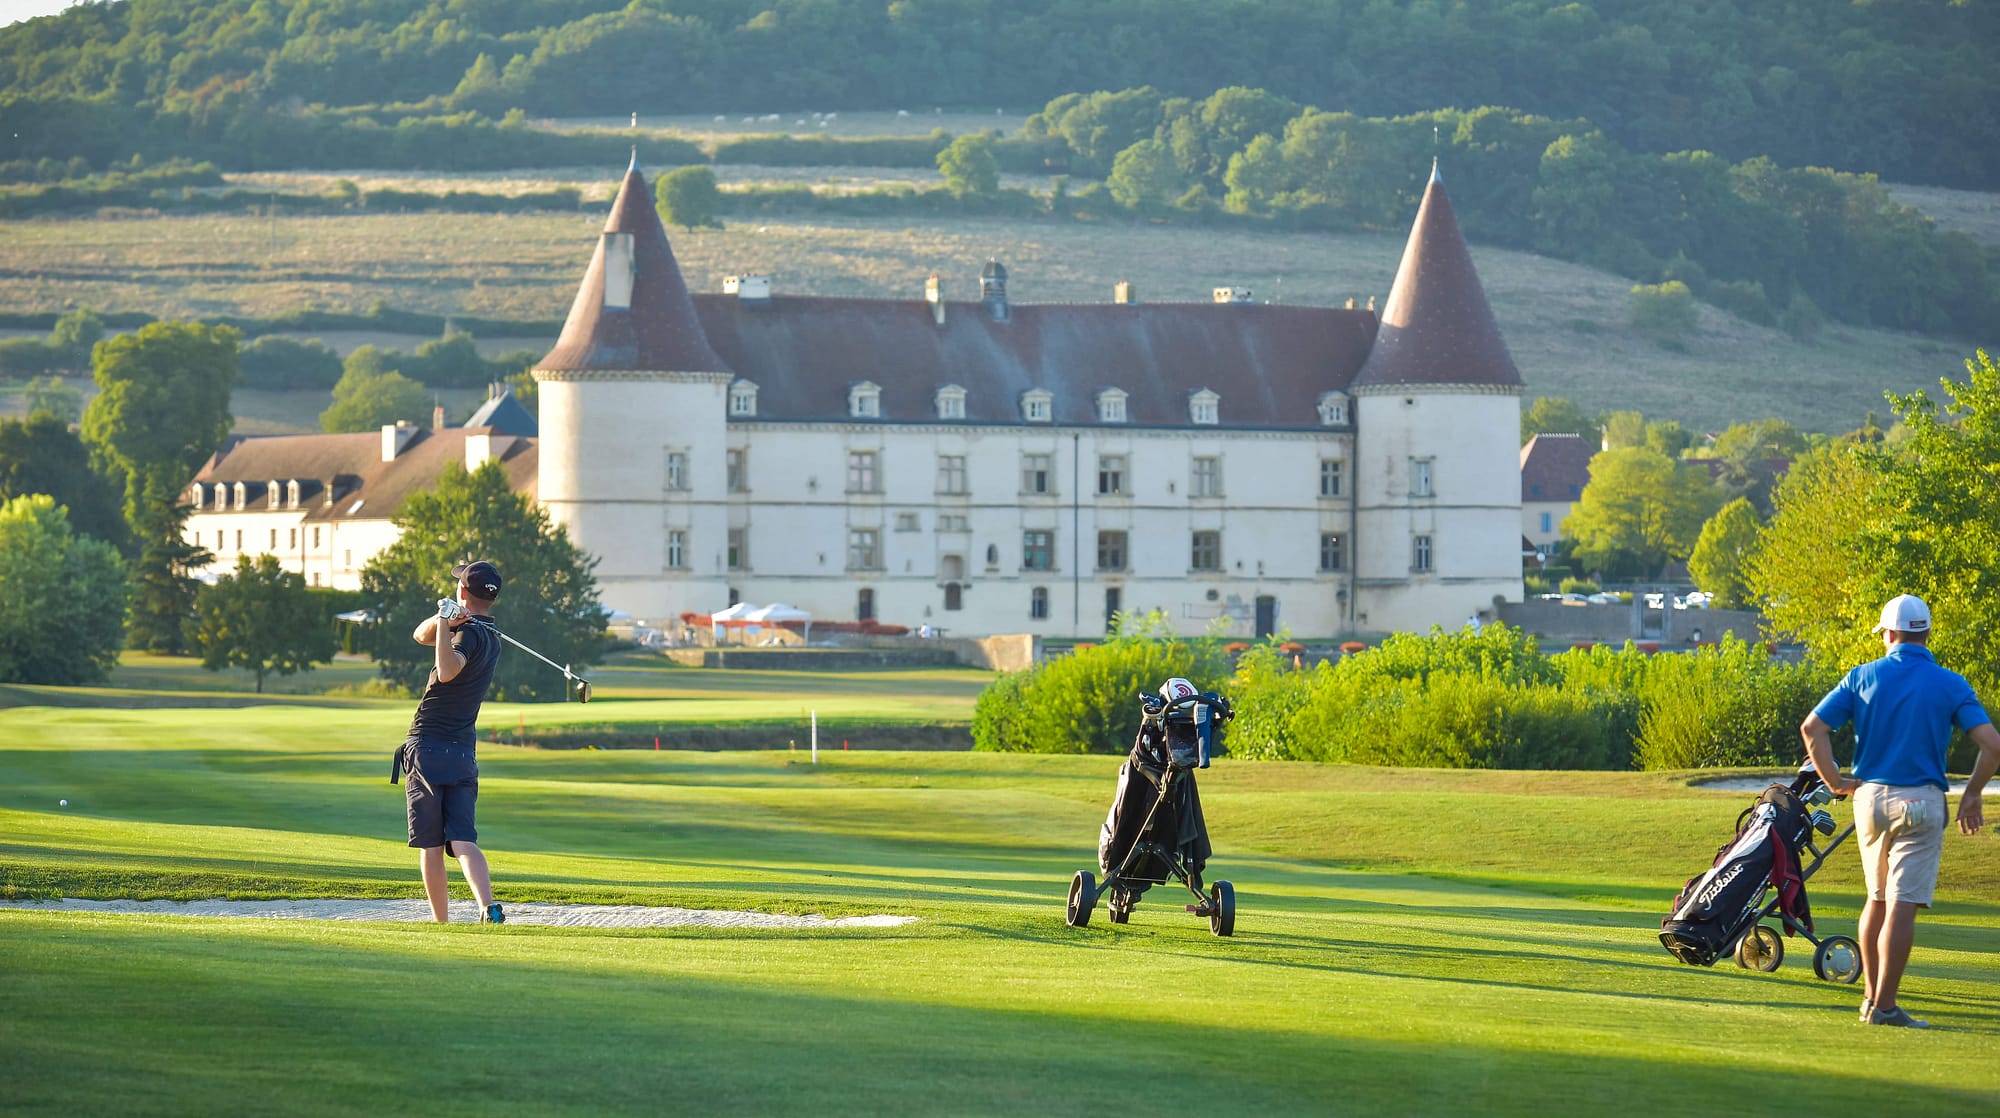 Chateau de Chailly golf